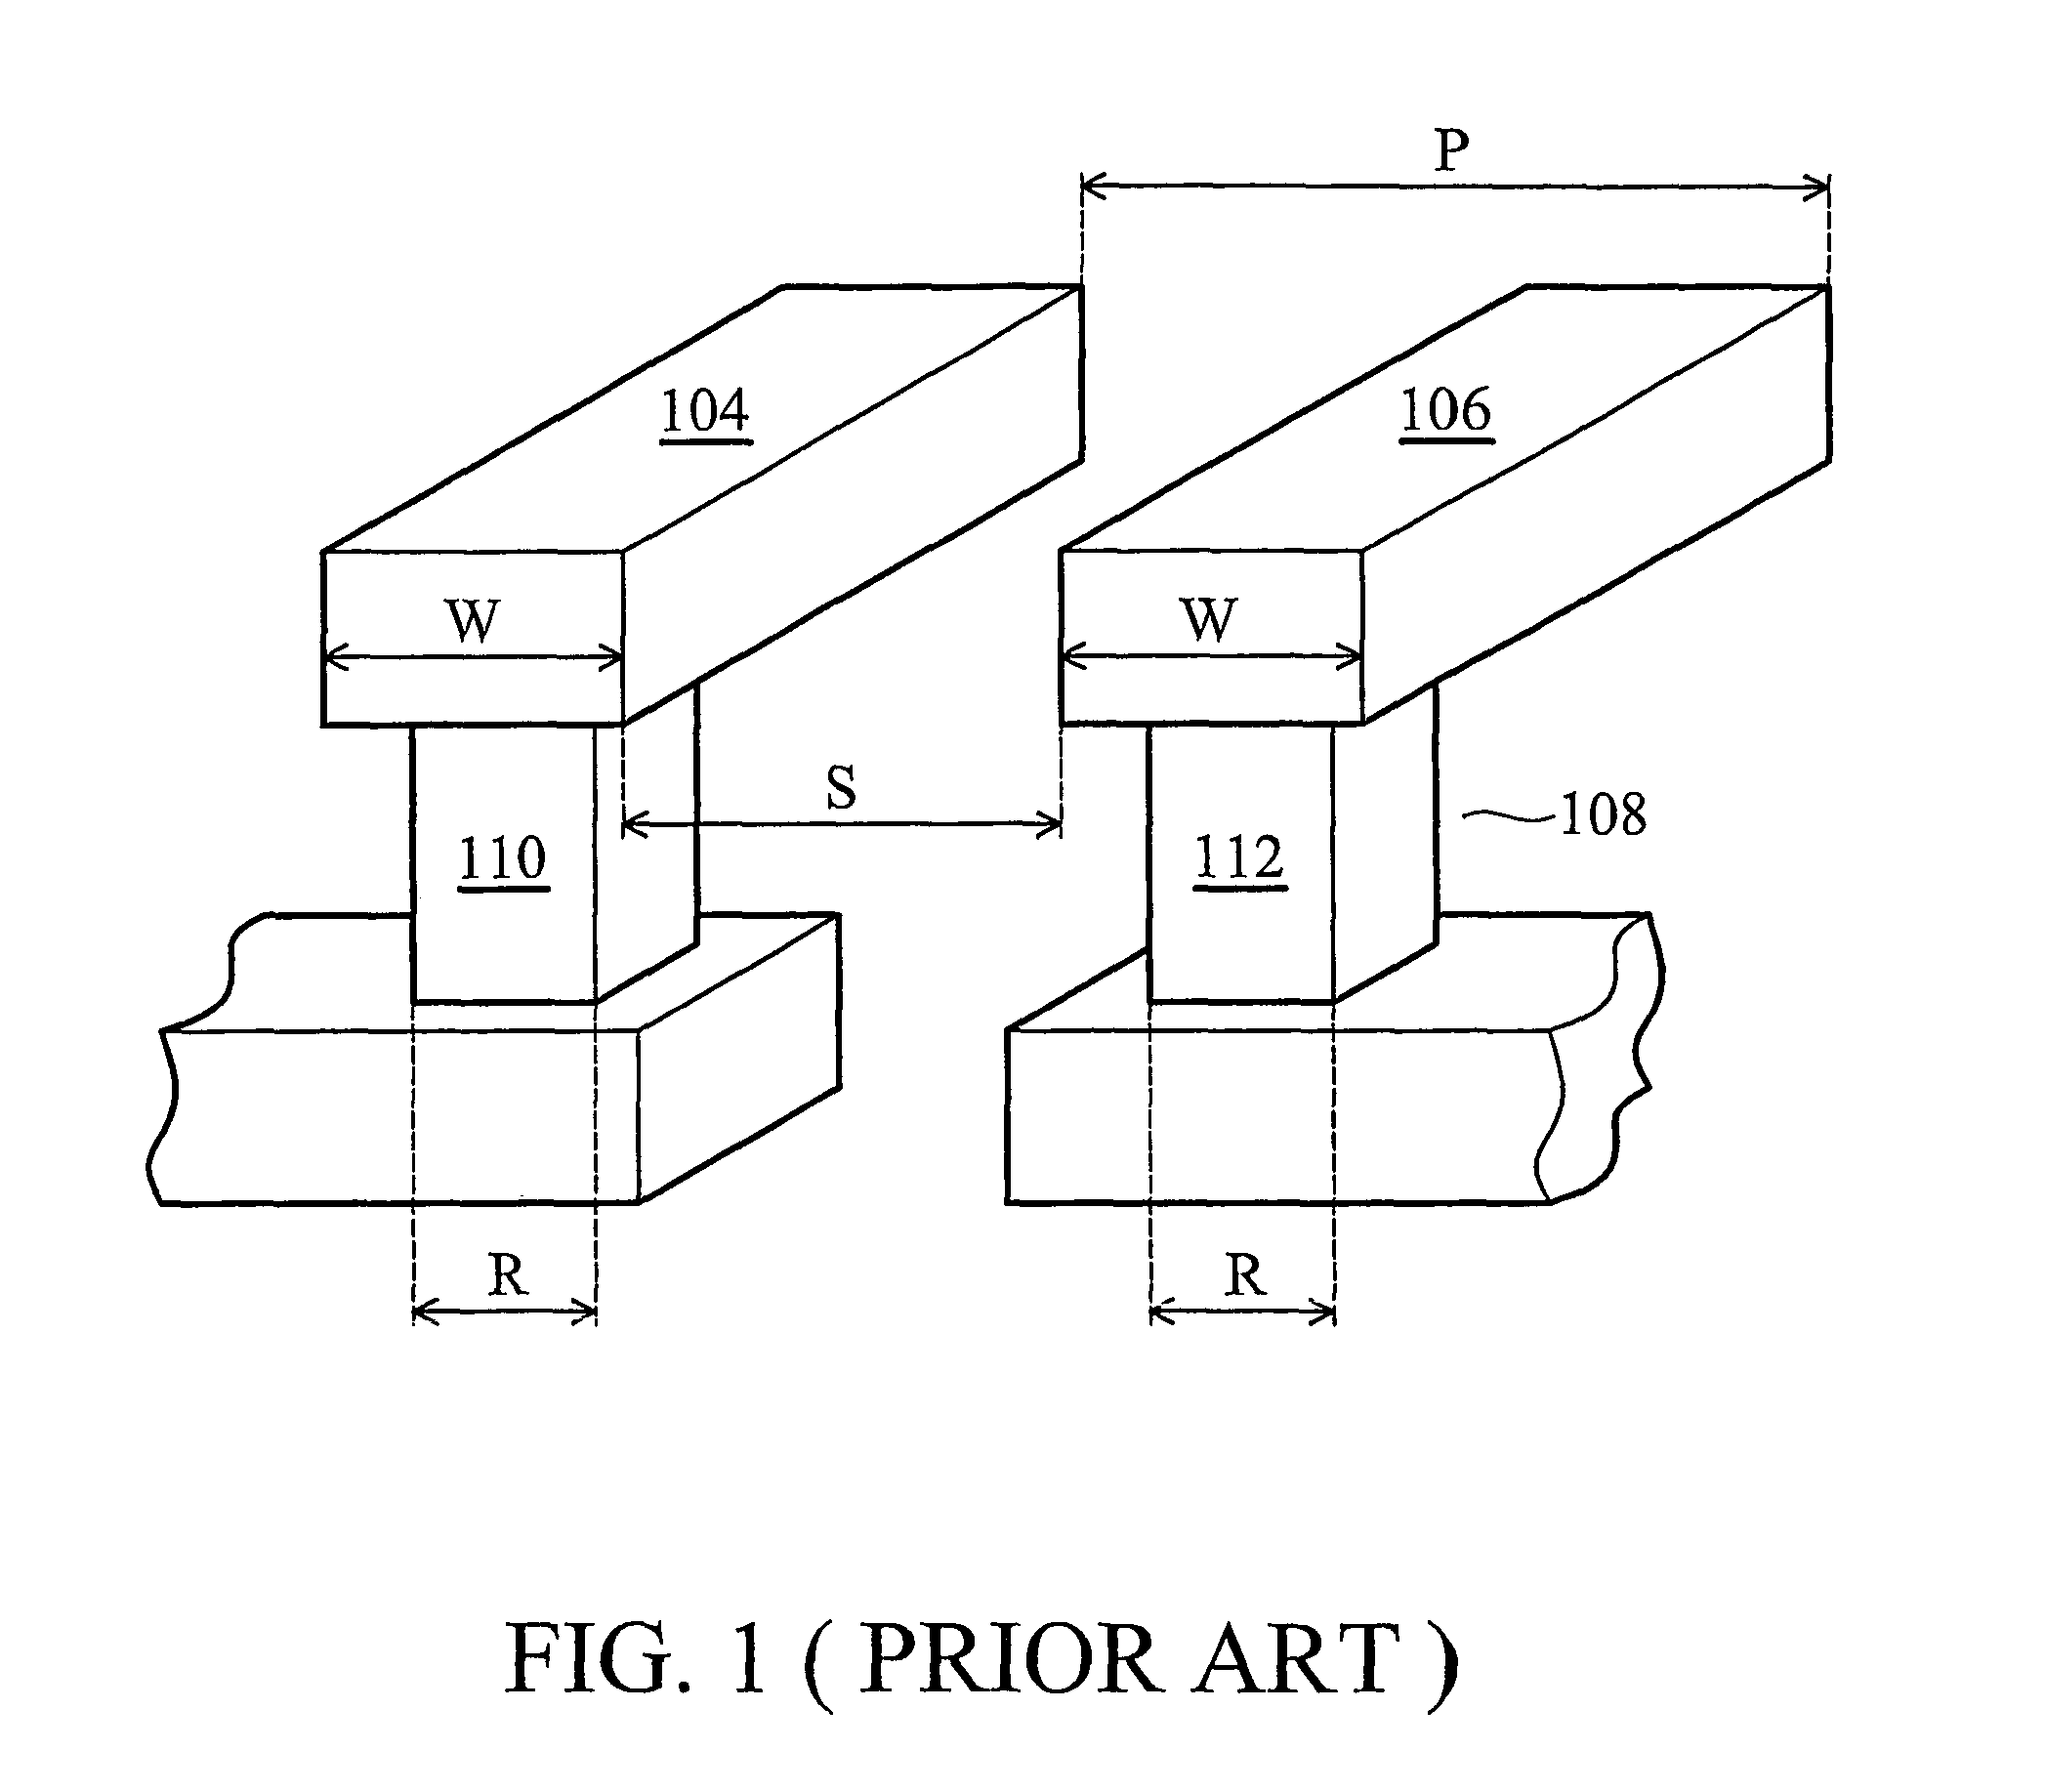 Interconnection structure design for low RC delay and leakage